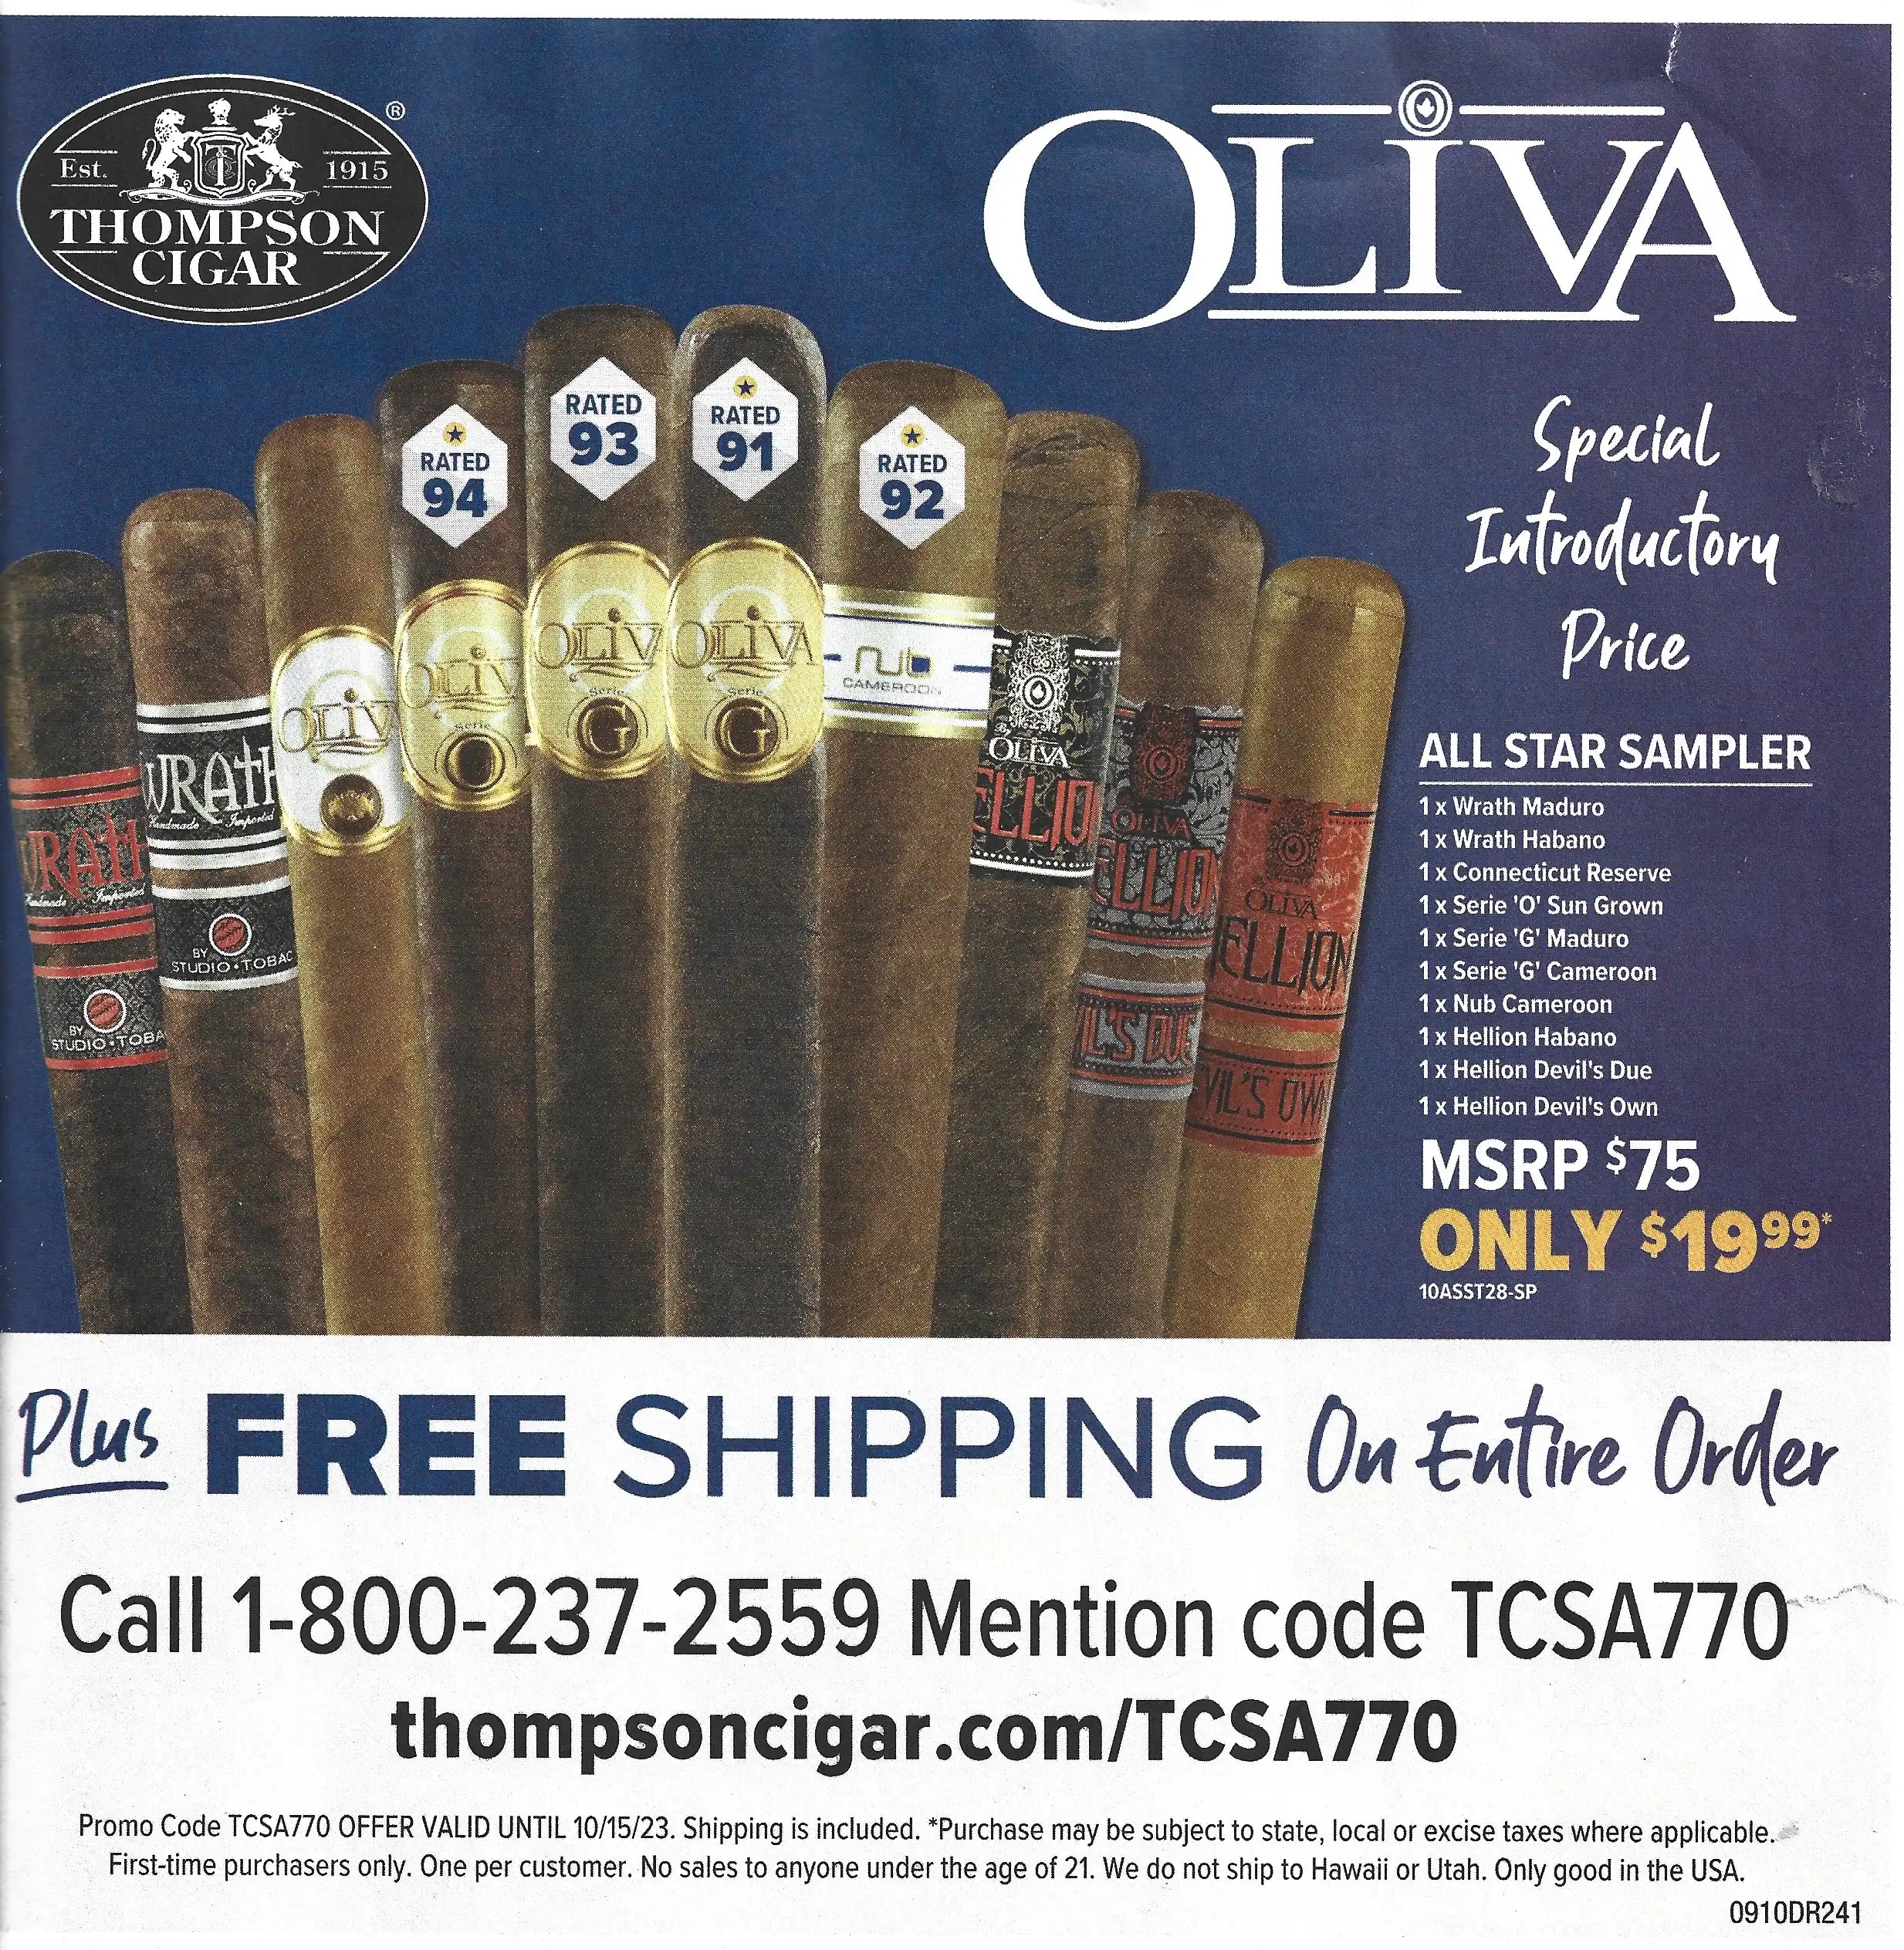 Thompson Cigar Oliva Special Introductory Price Promo Code - Expires 10/15/2023